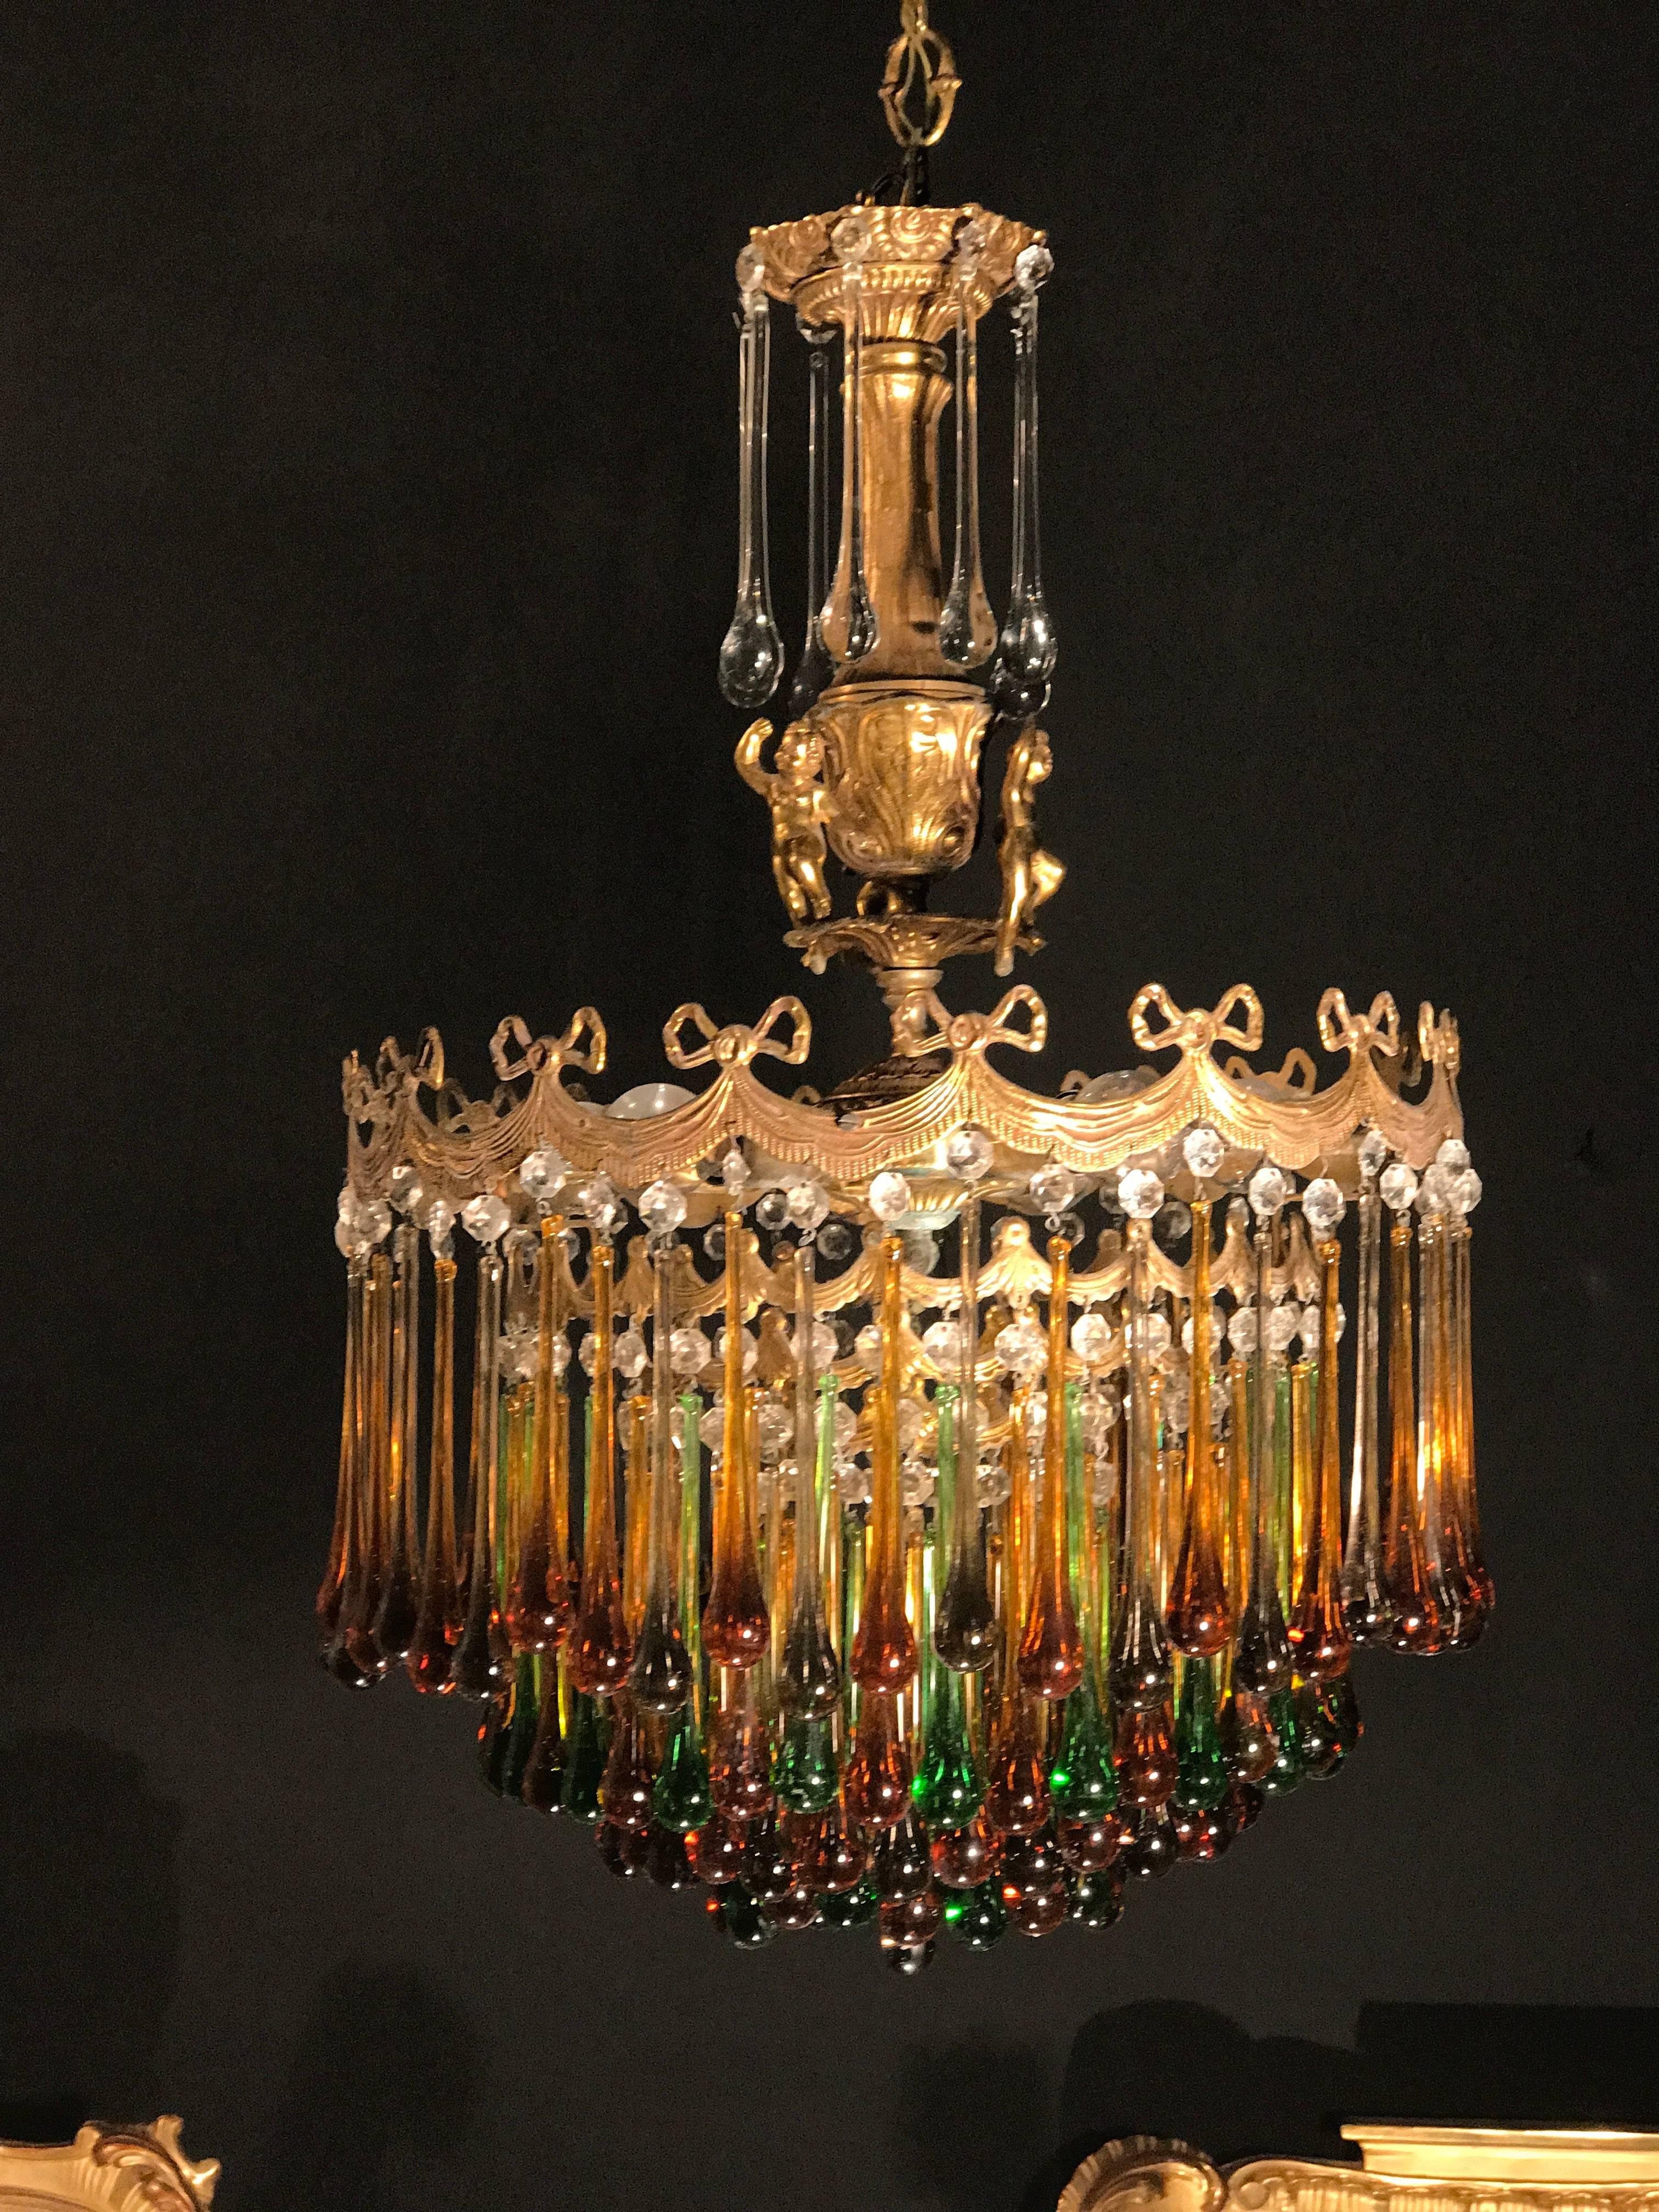 Splendid waterfall chandelier with a finely chiseled brass frame with four lower tiers all of which are dripping a multicolored teardrop glasses. The center is adorned with three graceful dancing putti.
There are six E 27 light bulbs.
Supplied